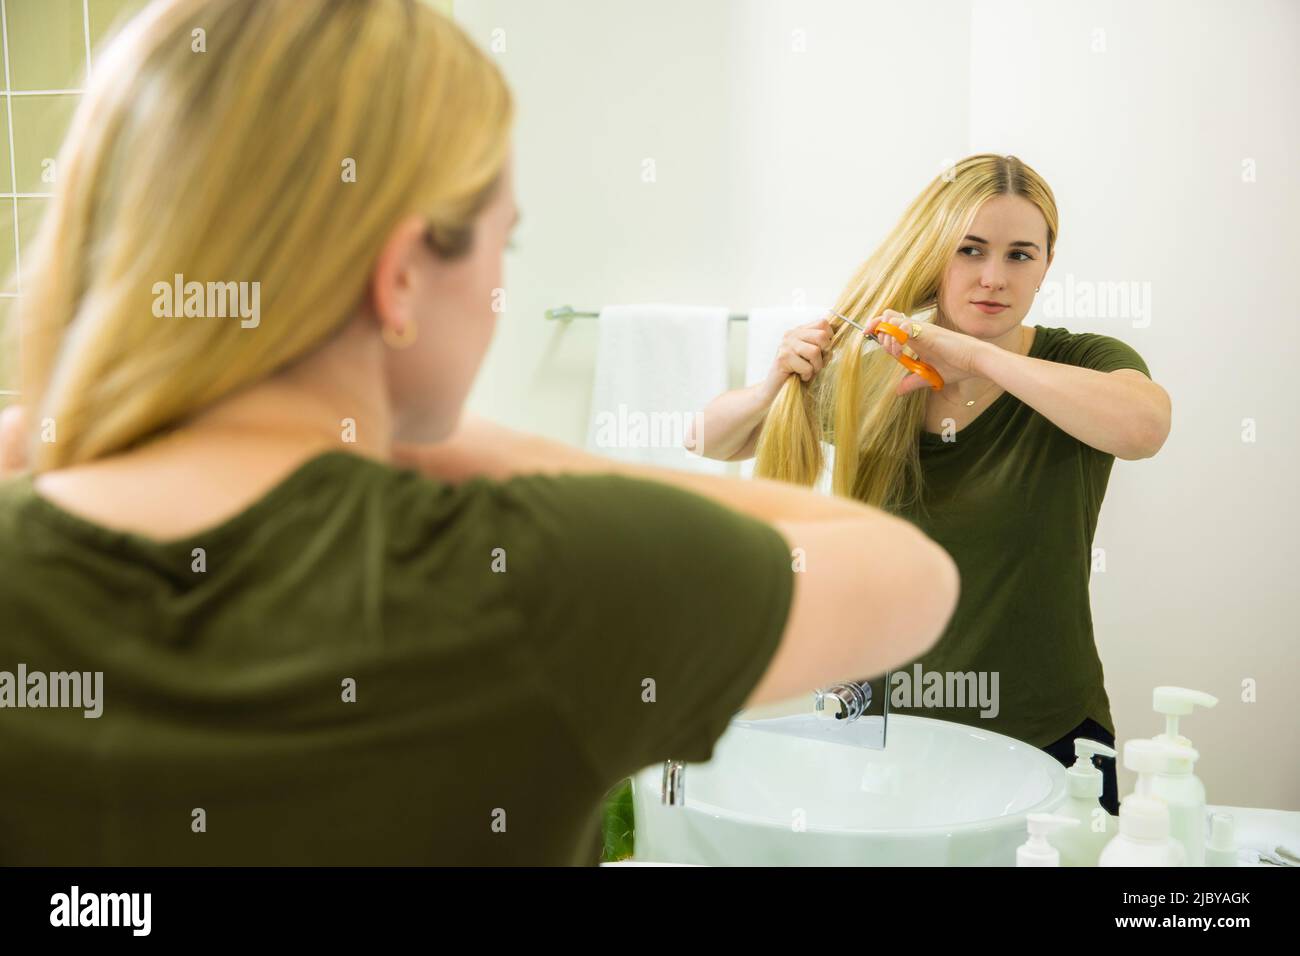 Cute Girl With Scissors Cutting Own Hair At Home In Front Of Bathroom  Mirror Stock Illustration - Download Image Now - iStock